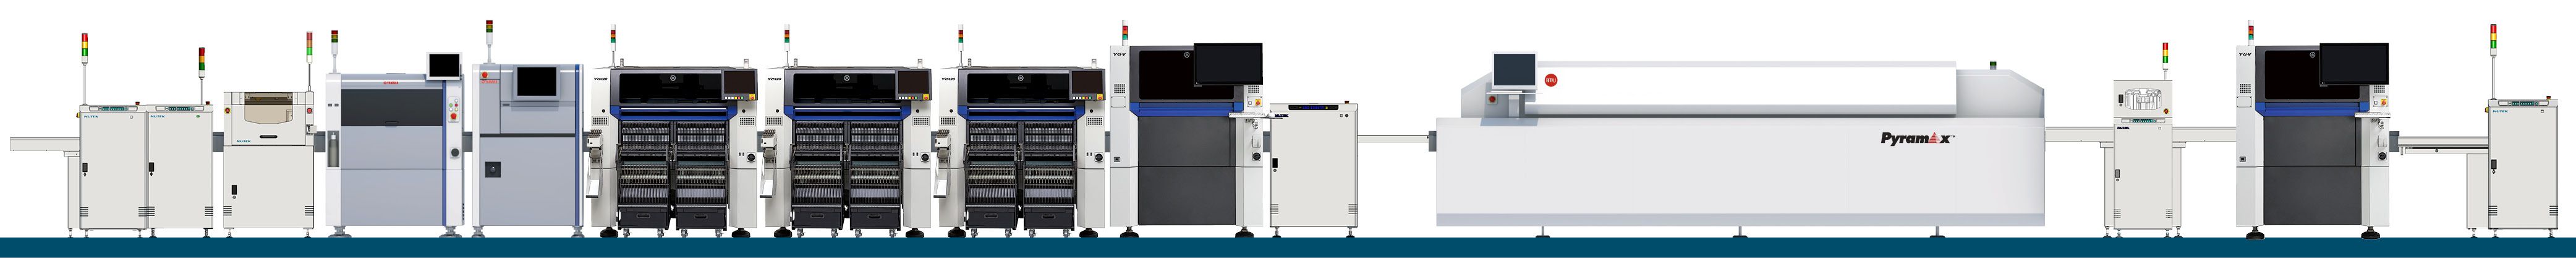 SMT line machinery and software from YAMAHA SMT